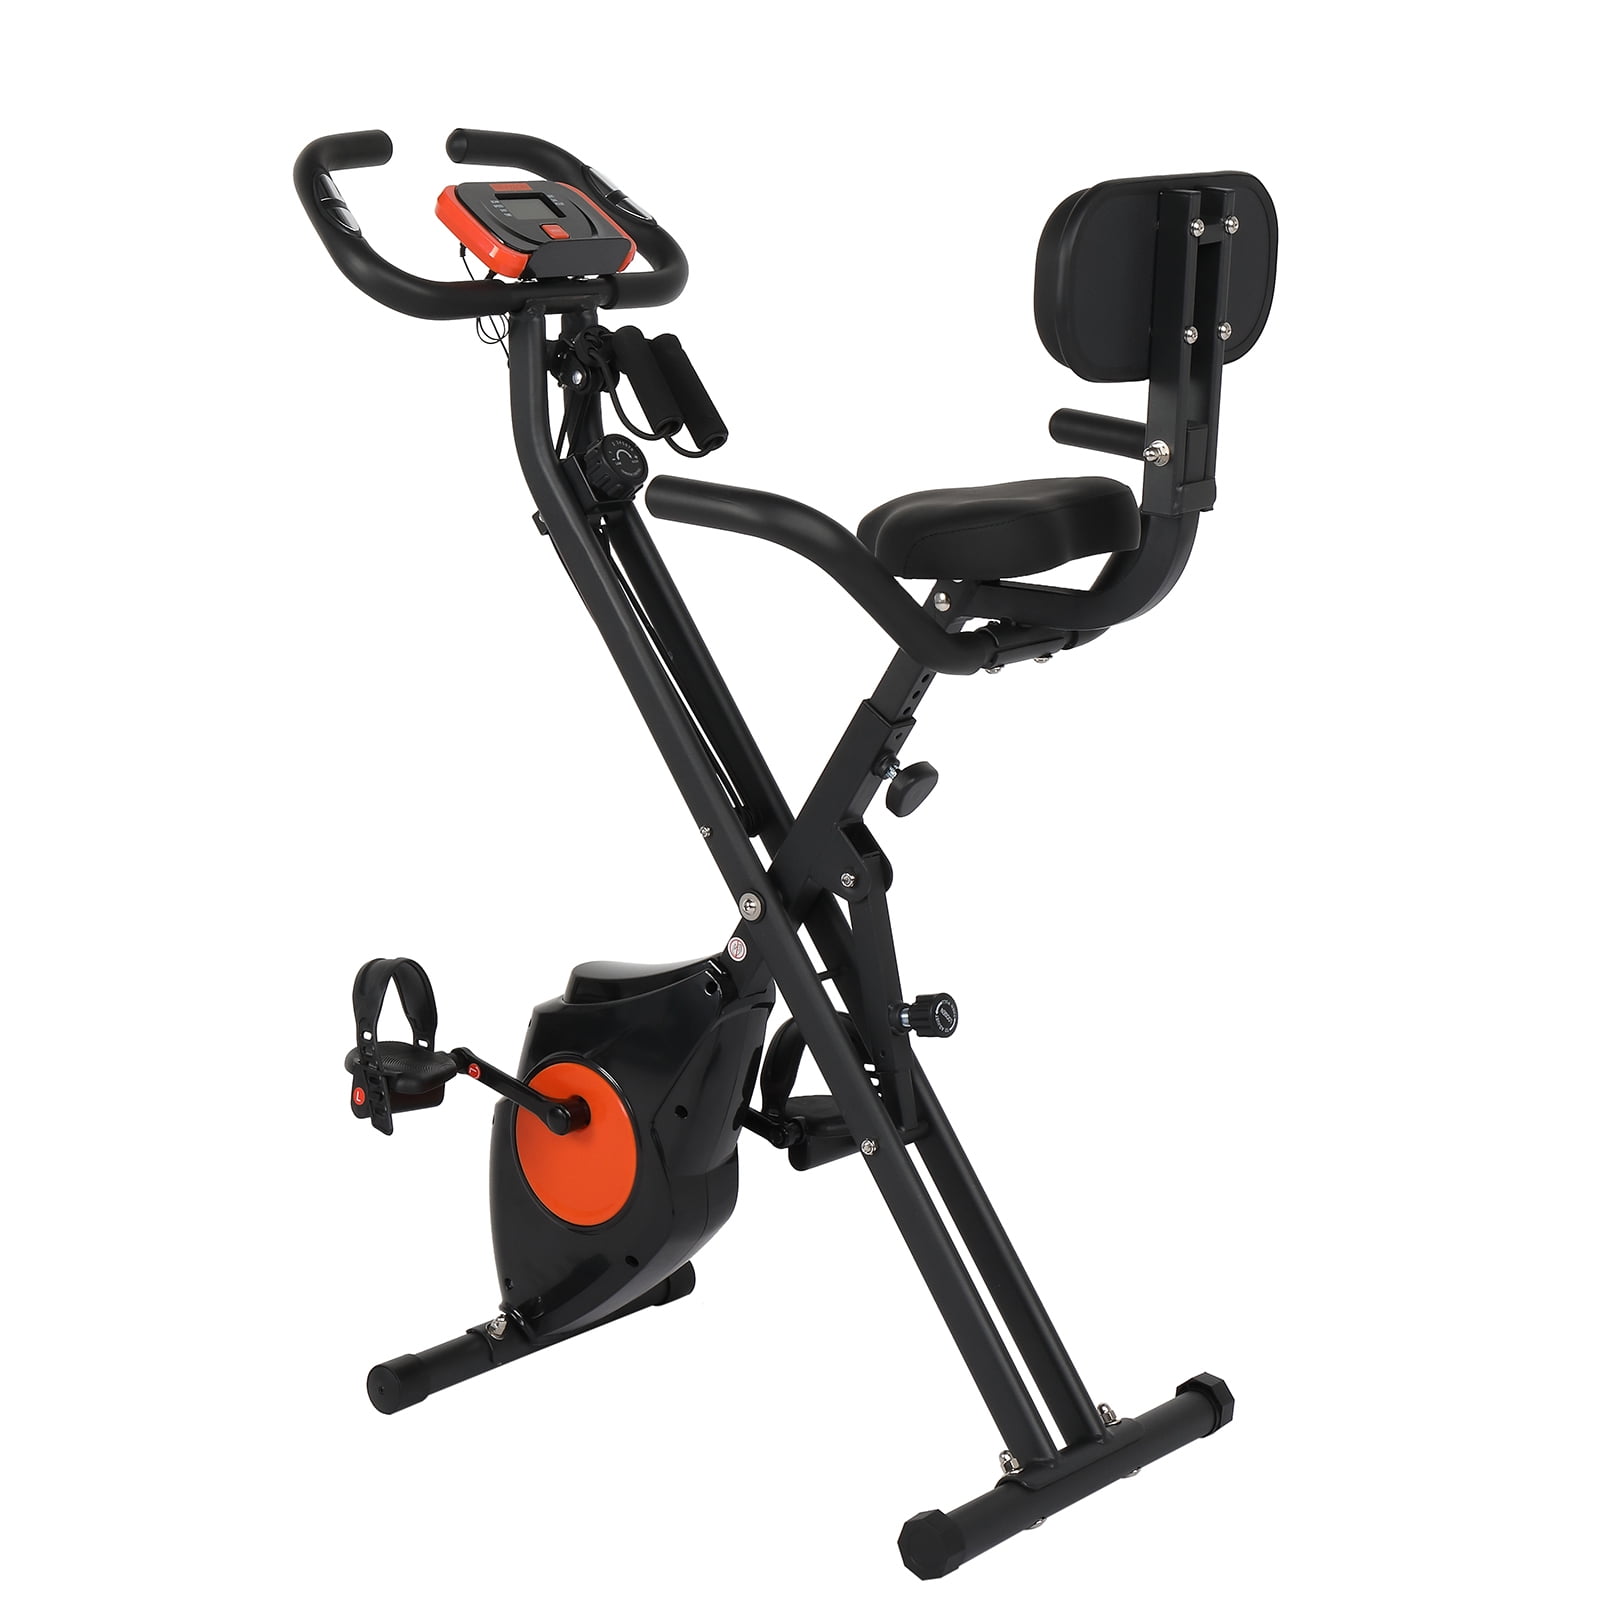 Cardio Fitness Workout Home Indoor Gym Magnetic Bike 120KG Exercise Magnetic 